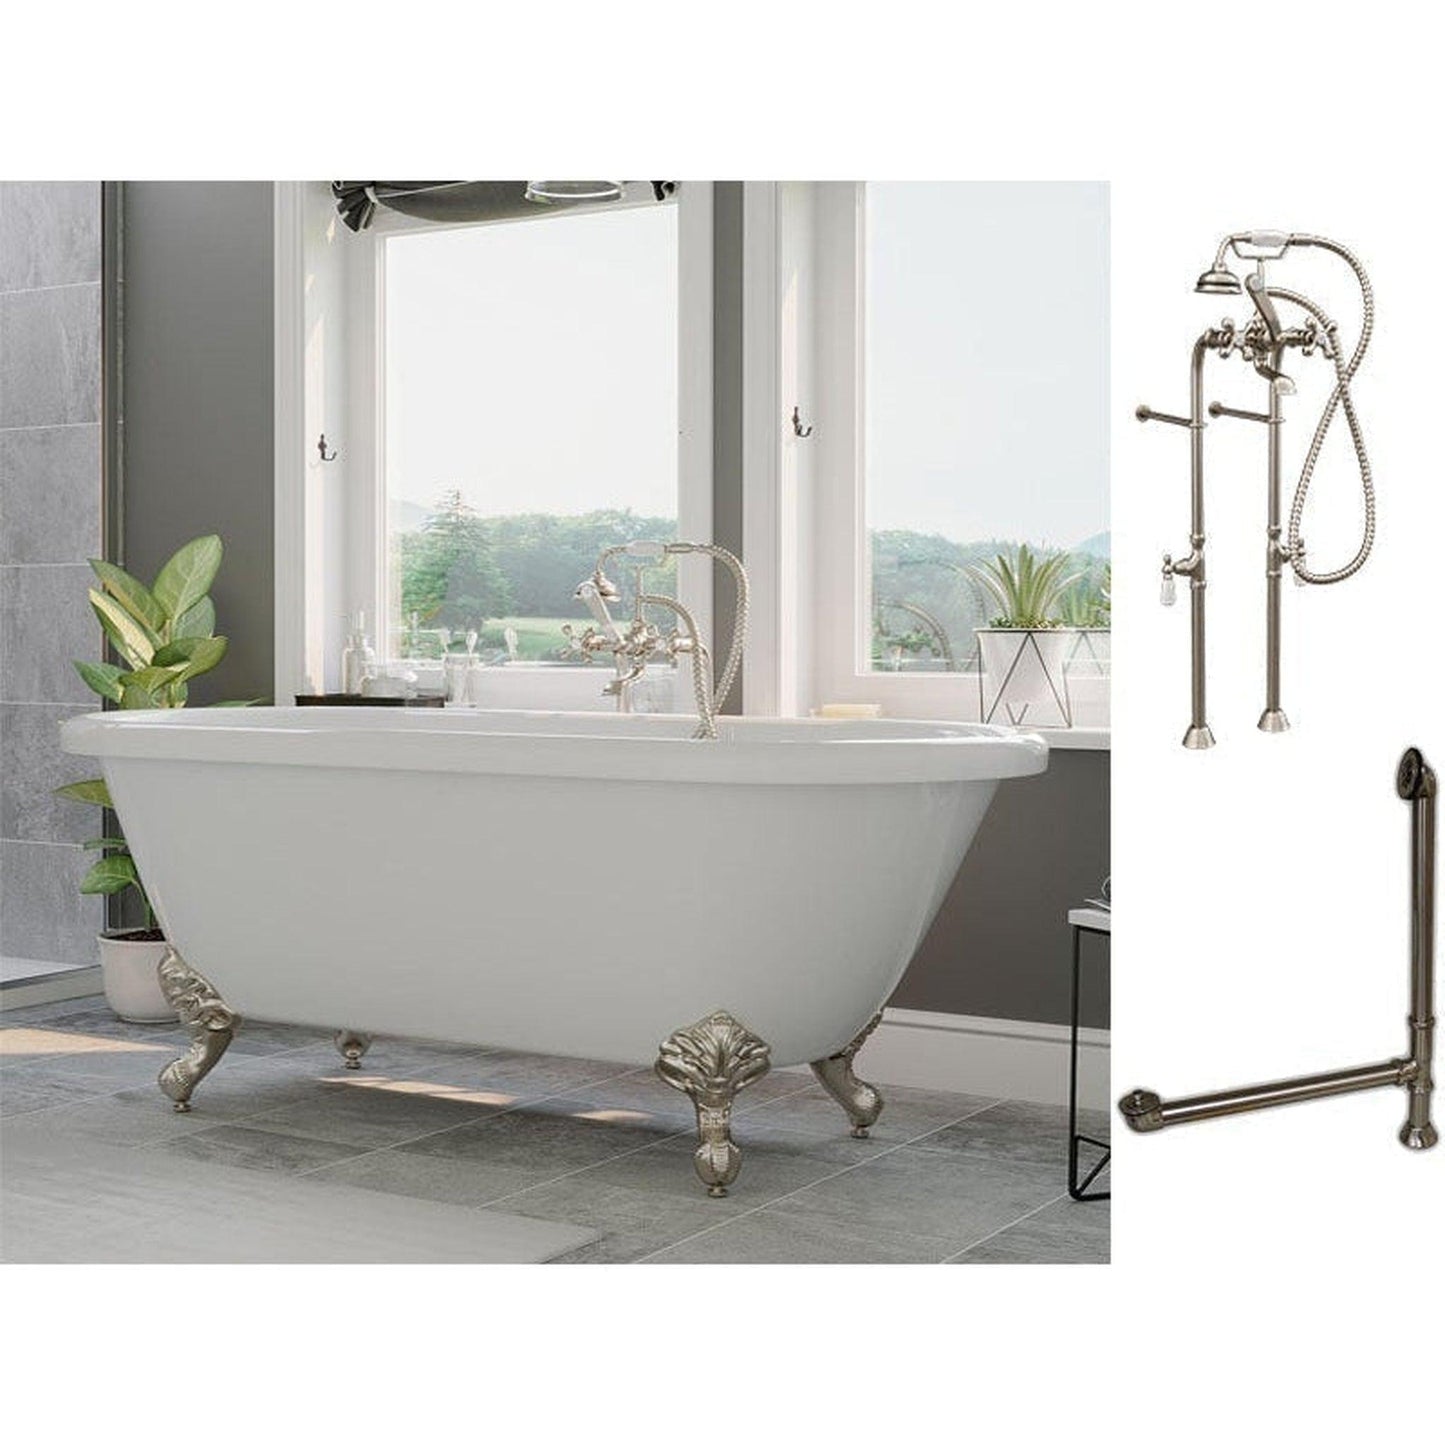 Cambridge Plumbing 60" White Acrylic Double Ended Clawfoot Bathtub With No Deck Holes And Complete Plumbing Package Including Floor Mounted British Telephone Faucet, Drain And Overflow Assembly In Brushed Nickel